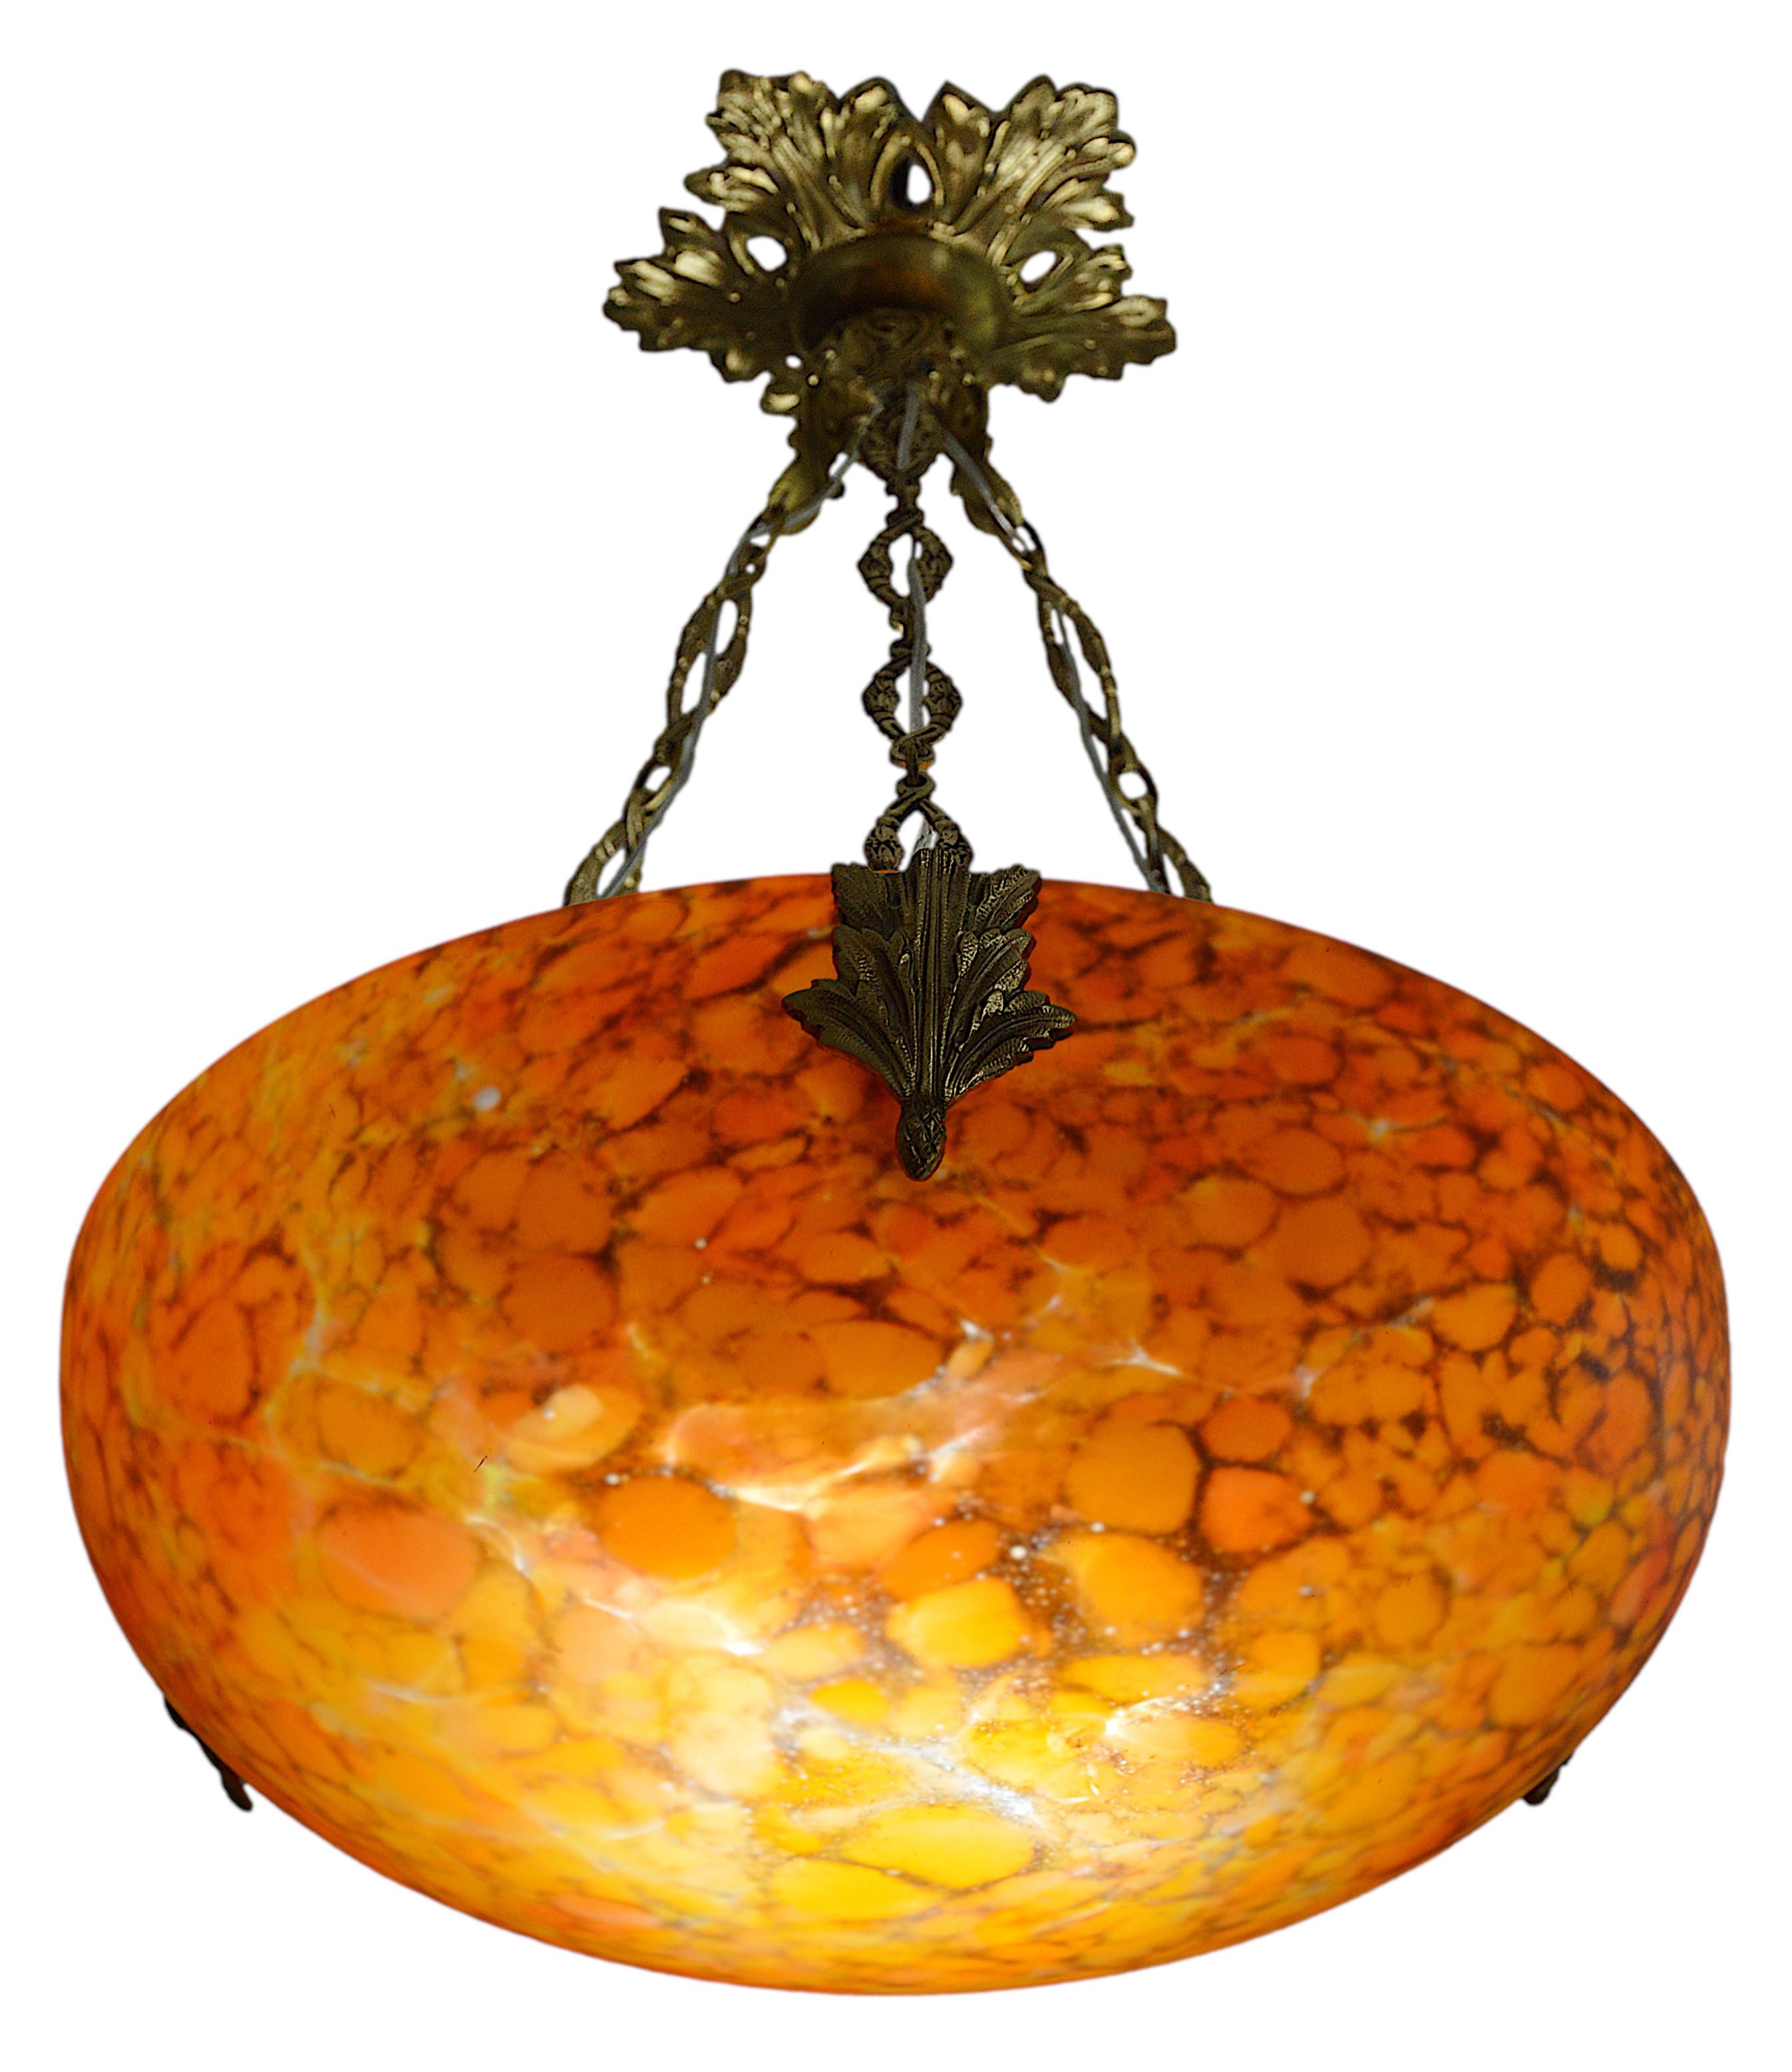 French Art Deco pendant chandelier by MARKHBEINN, 25-37, rue Sedaine, Paris, 11e, France, ca.1925. Glass shade hung on its bronze fixture. Height : 17